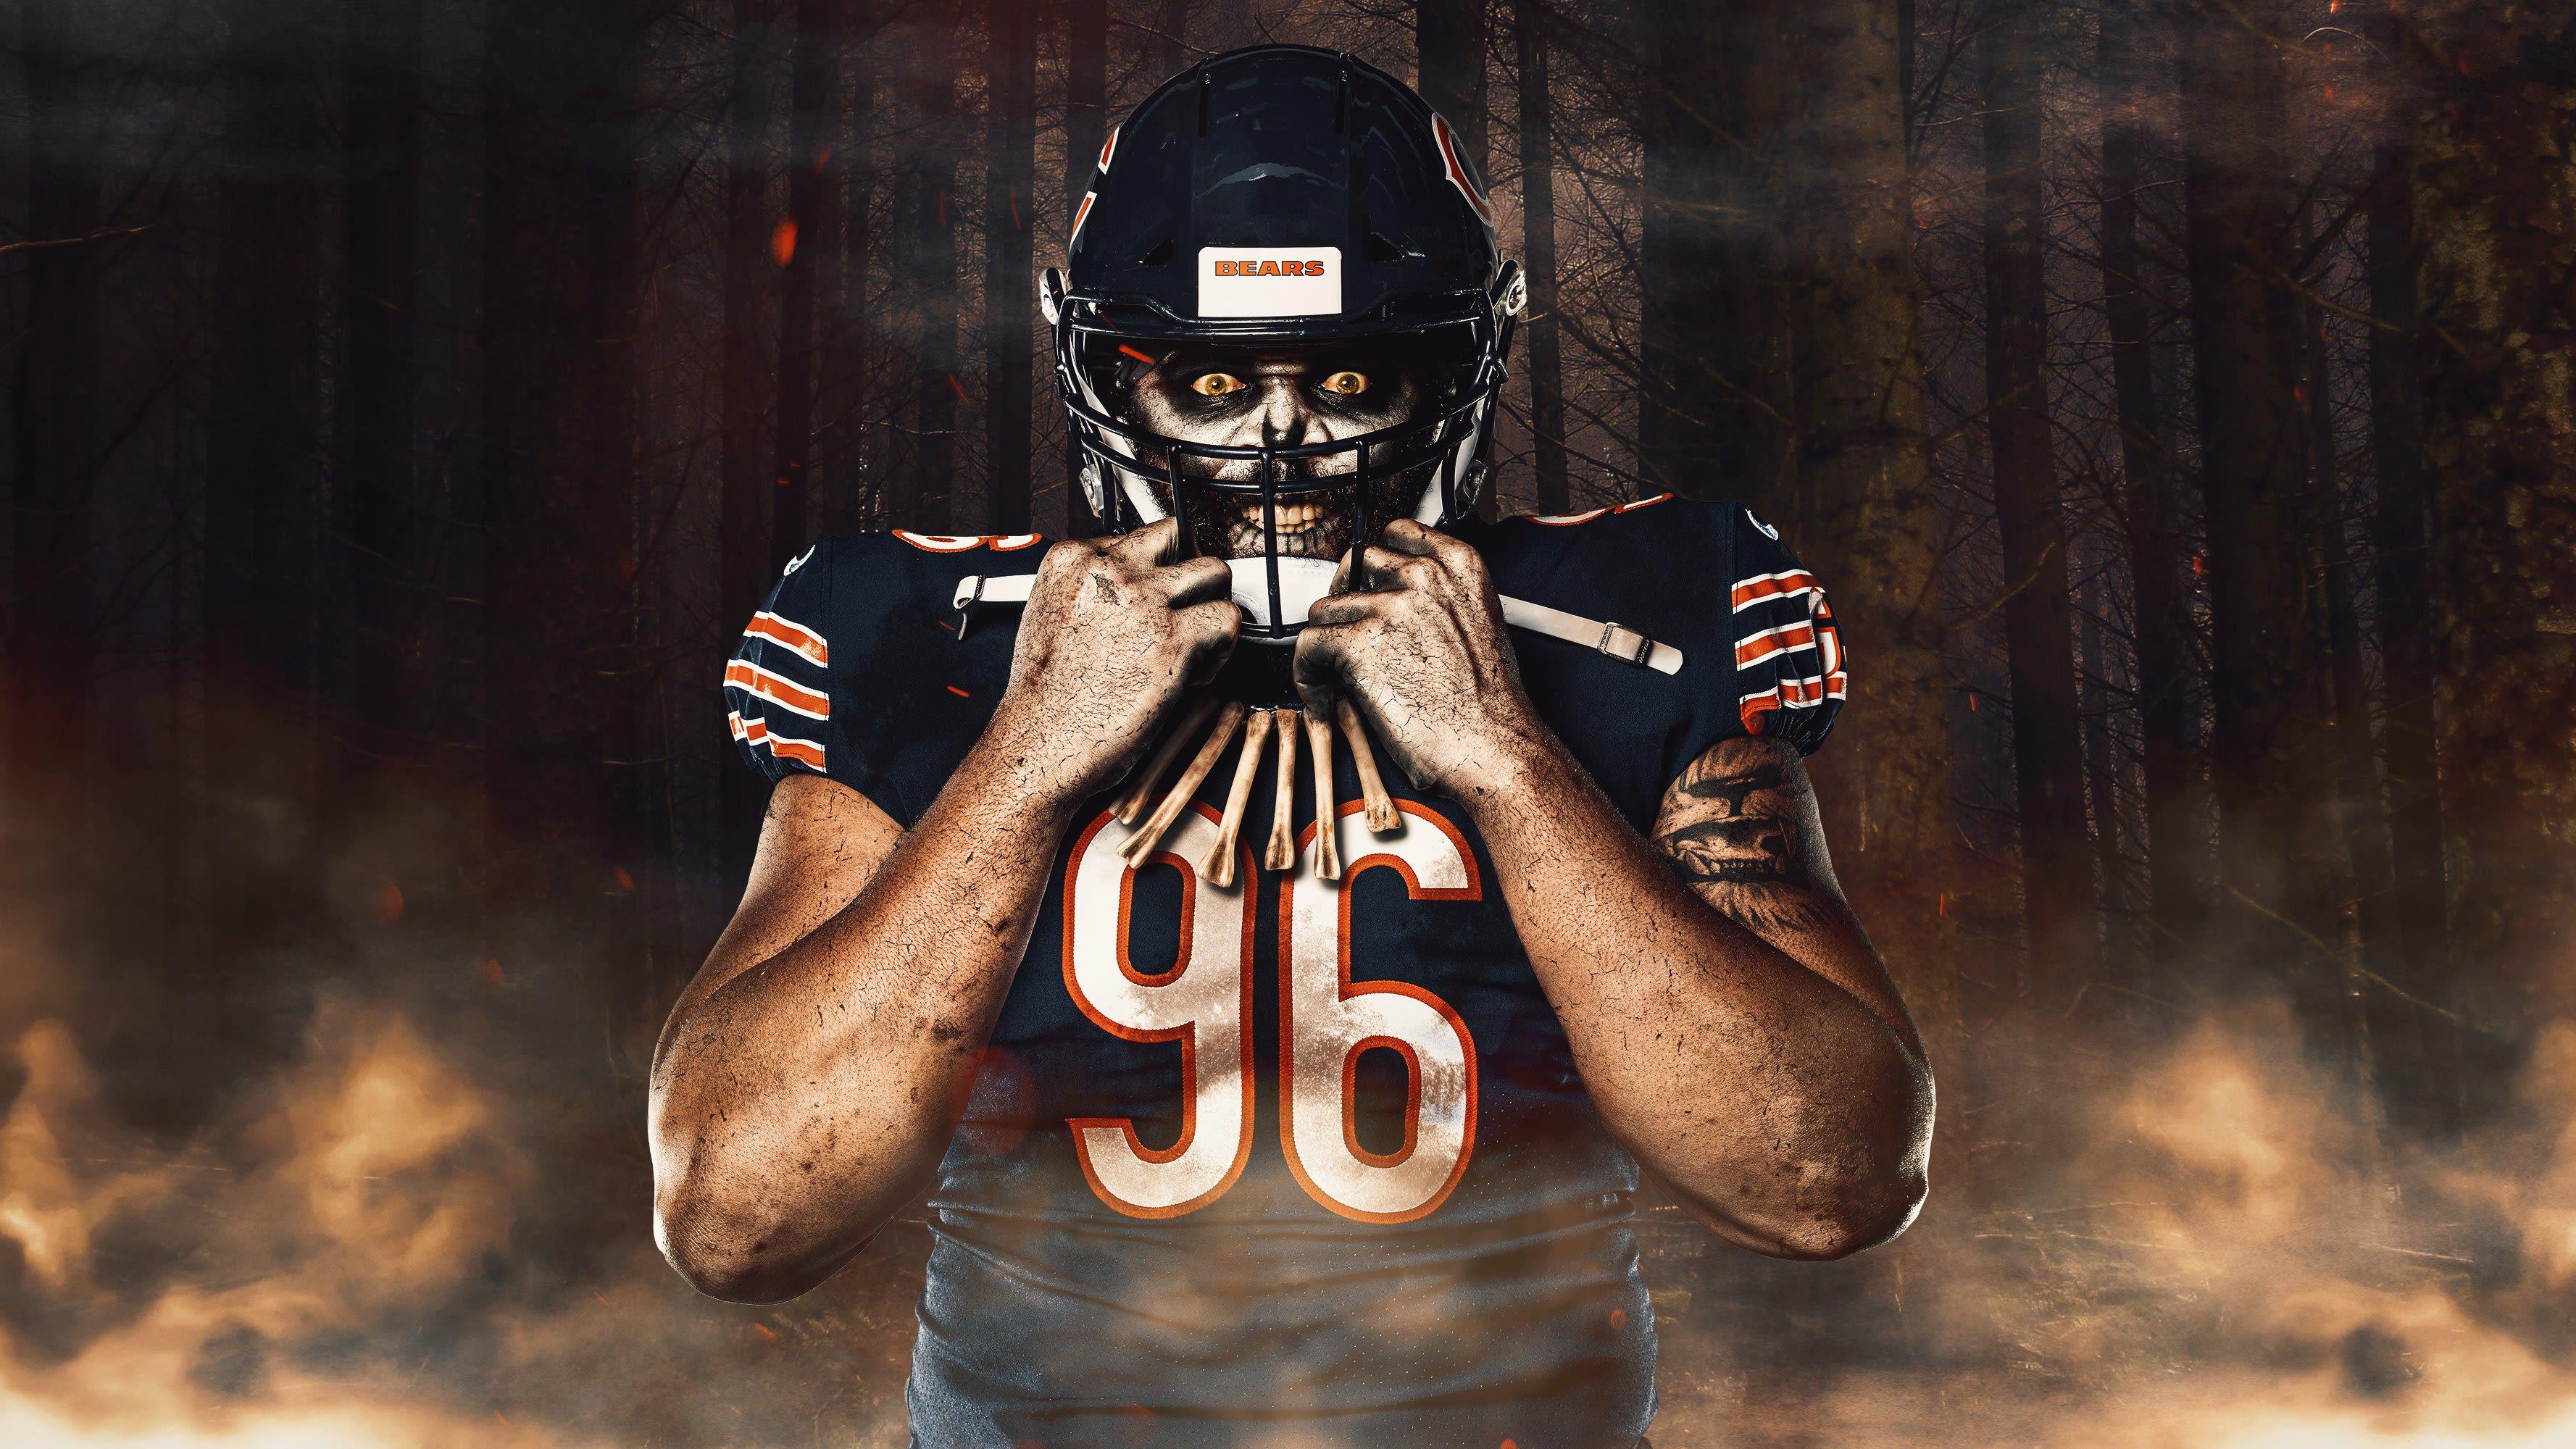 Chicago Bears Players Wallpapers Top Free Chicago Bears Players